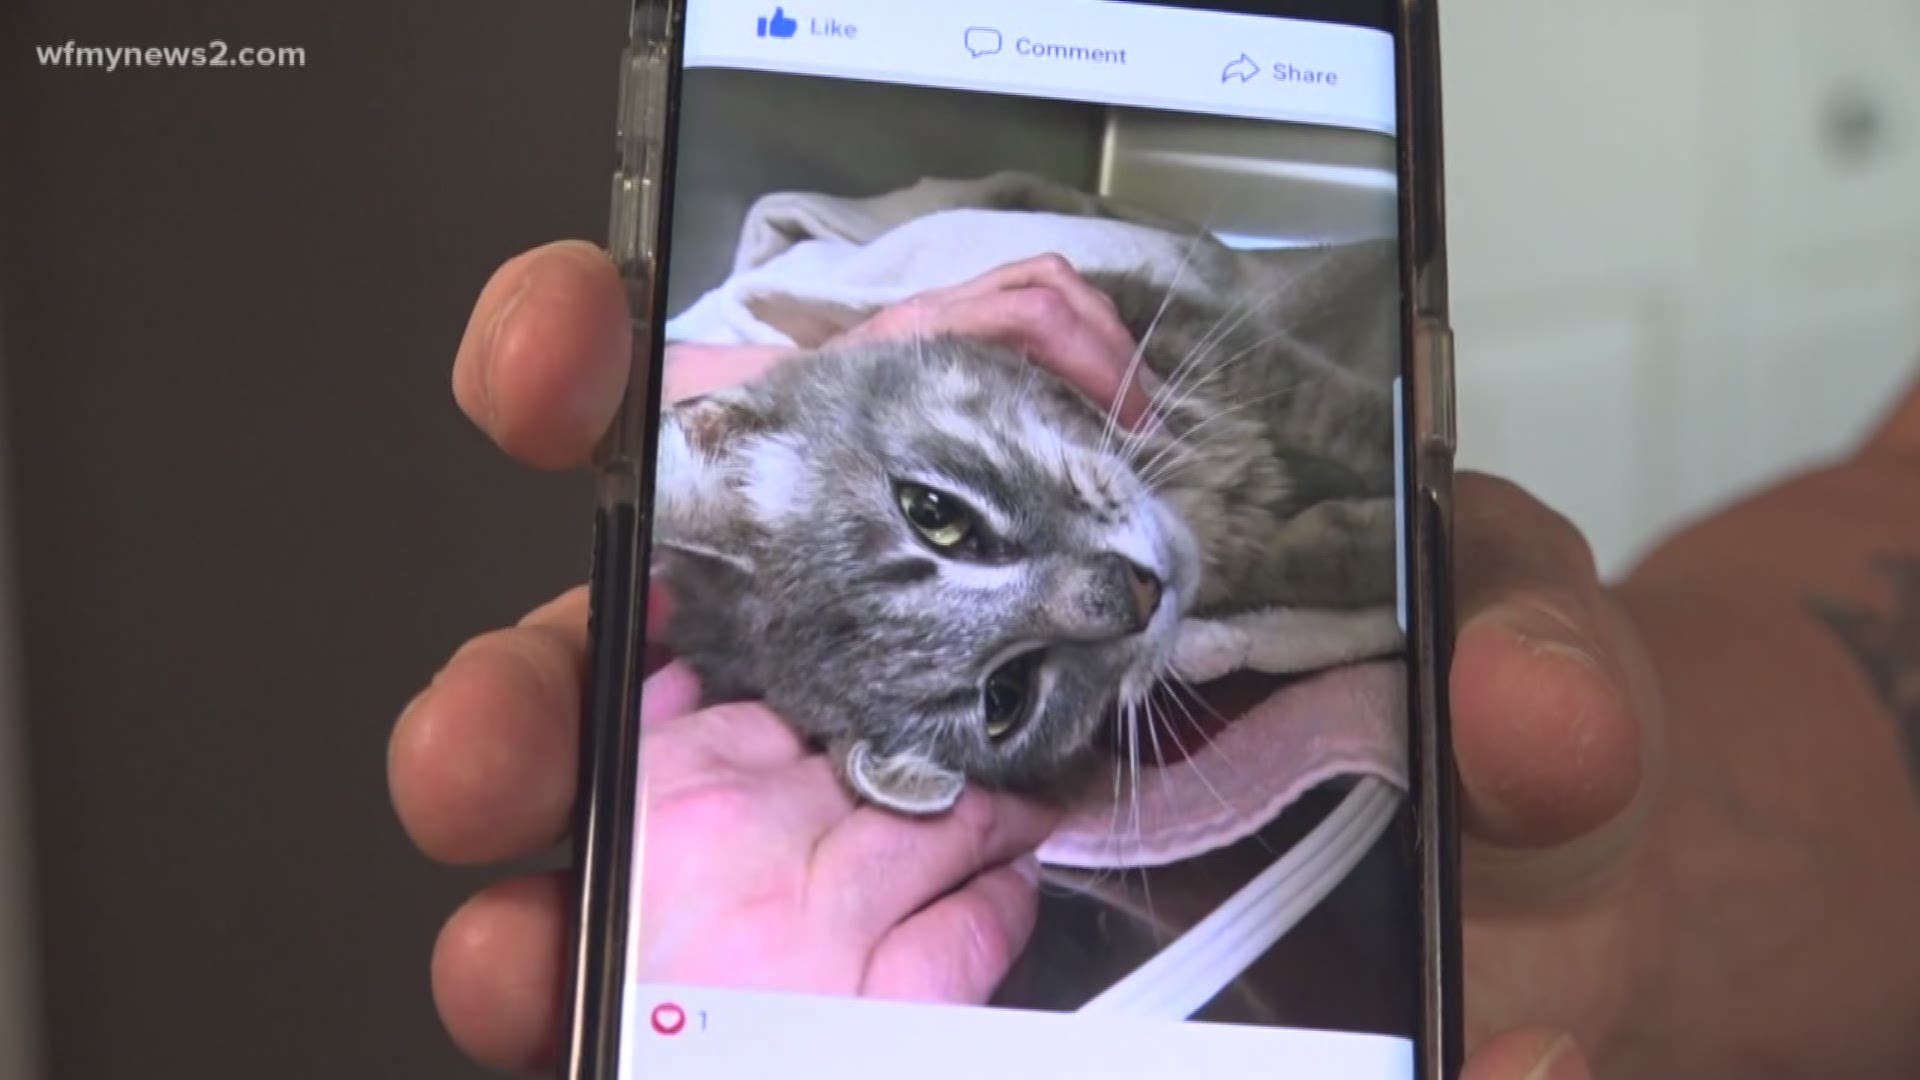 She found the cat with extensive third degree burns. Now police are investigating.